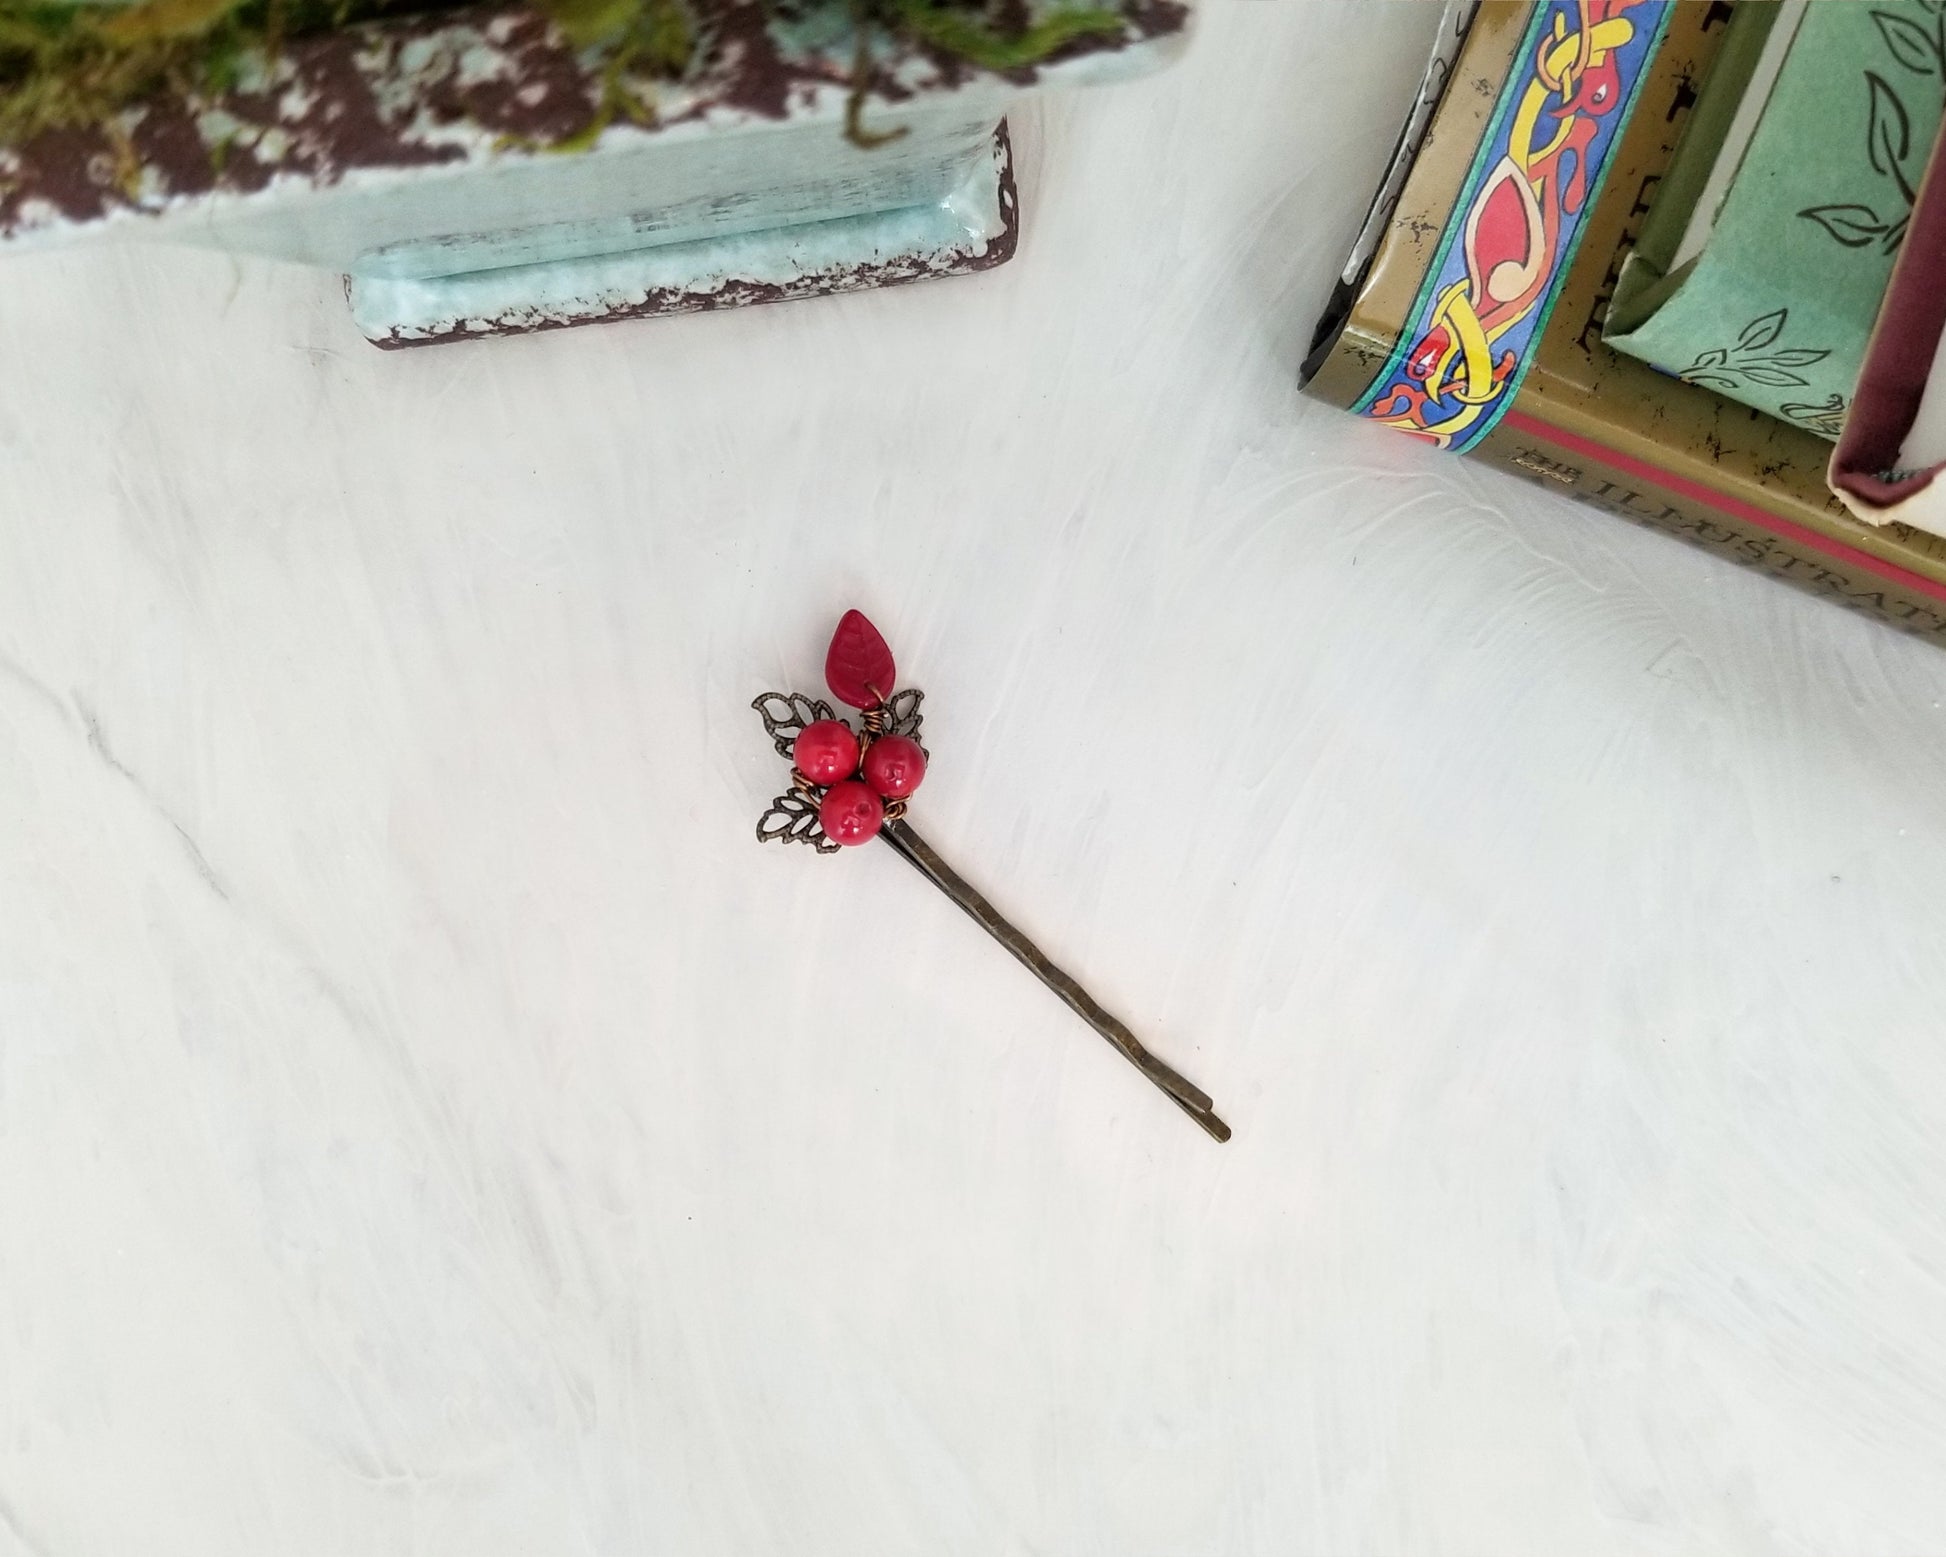 Wire Wrapped Beaded Bobby Pin / Hair Pin in Red, Bridesmaid, Wedding, Floral, Garden, Party, Boho, Bohemian, Choice of Colors and Metals